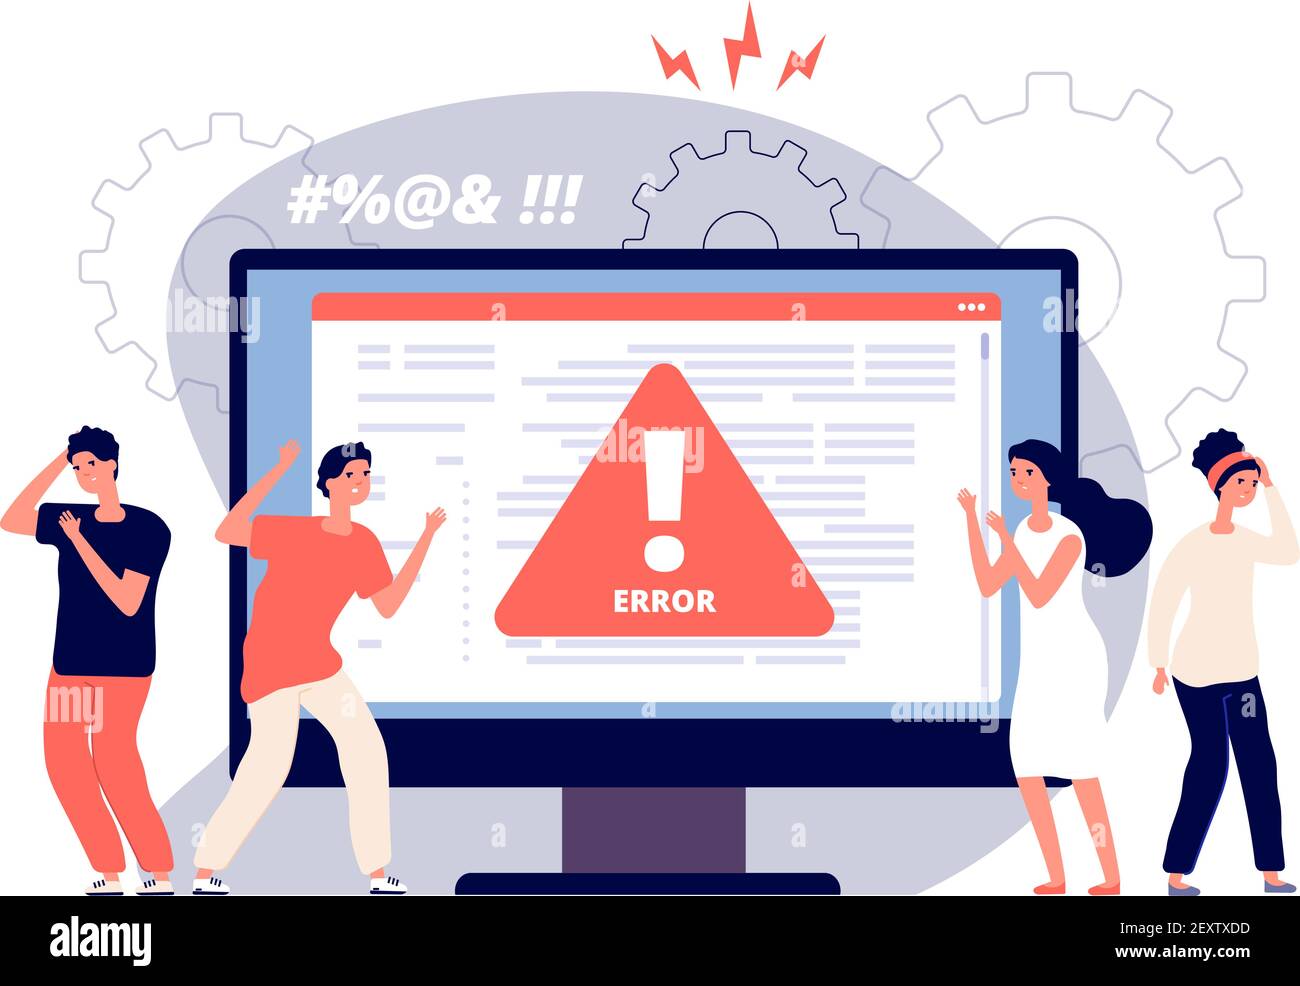 Computer error. Warnings unavailable page users, attention symbol alerts of problem, angry clients near monitor device, vector concept. Computer error, warning message, security alert illustration Stock Vector